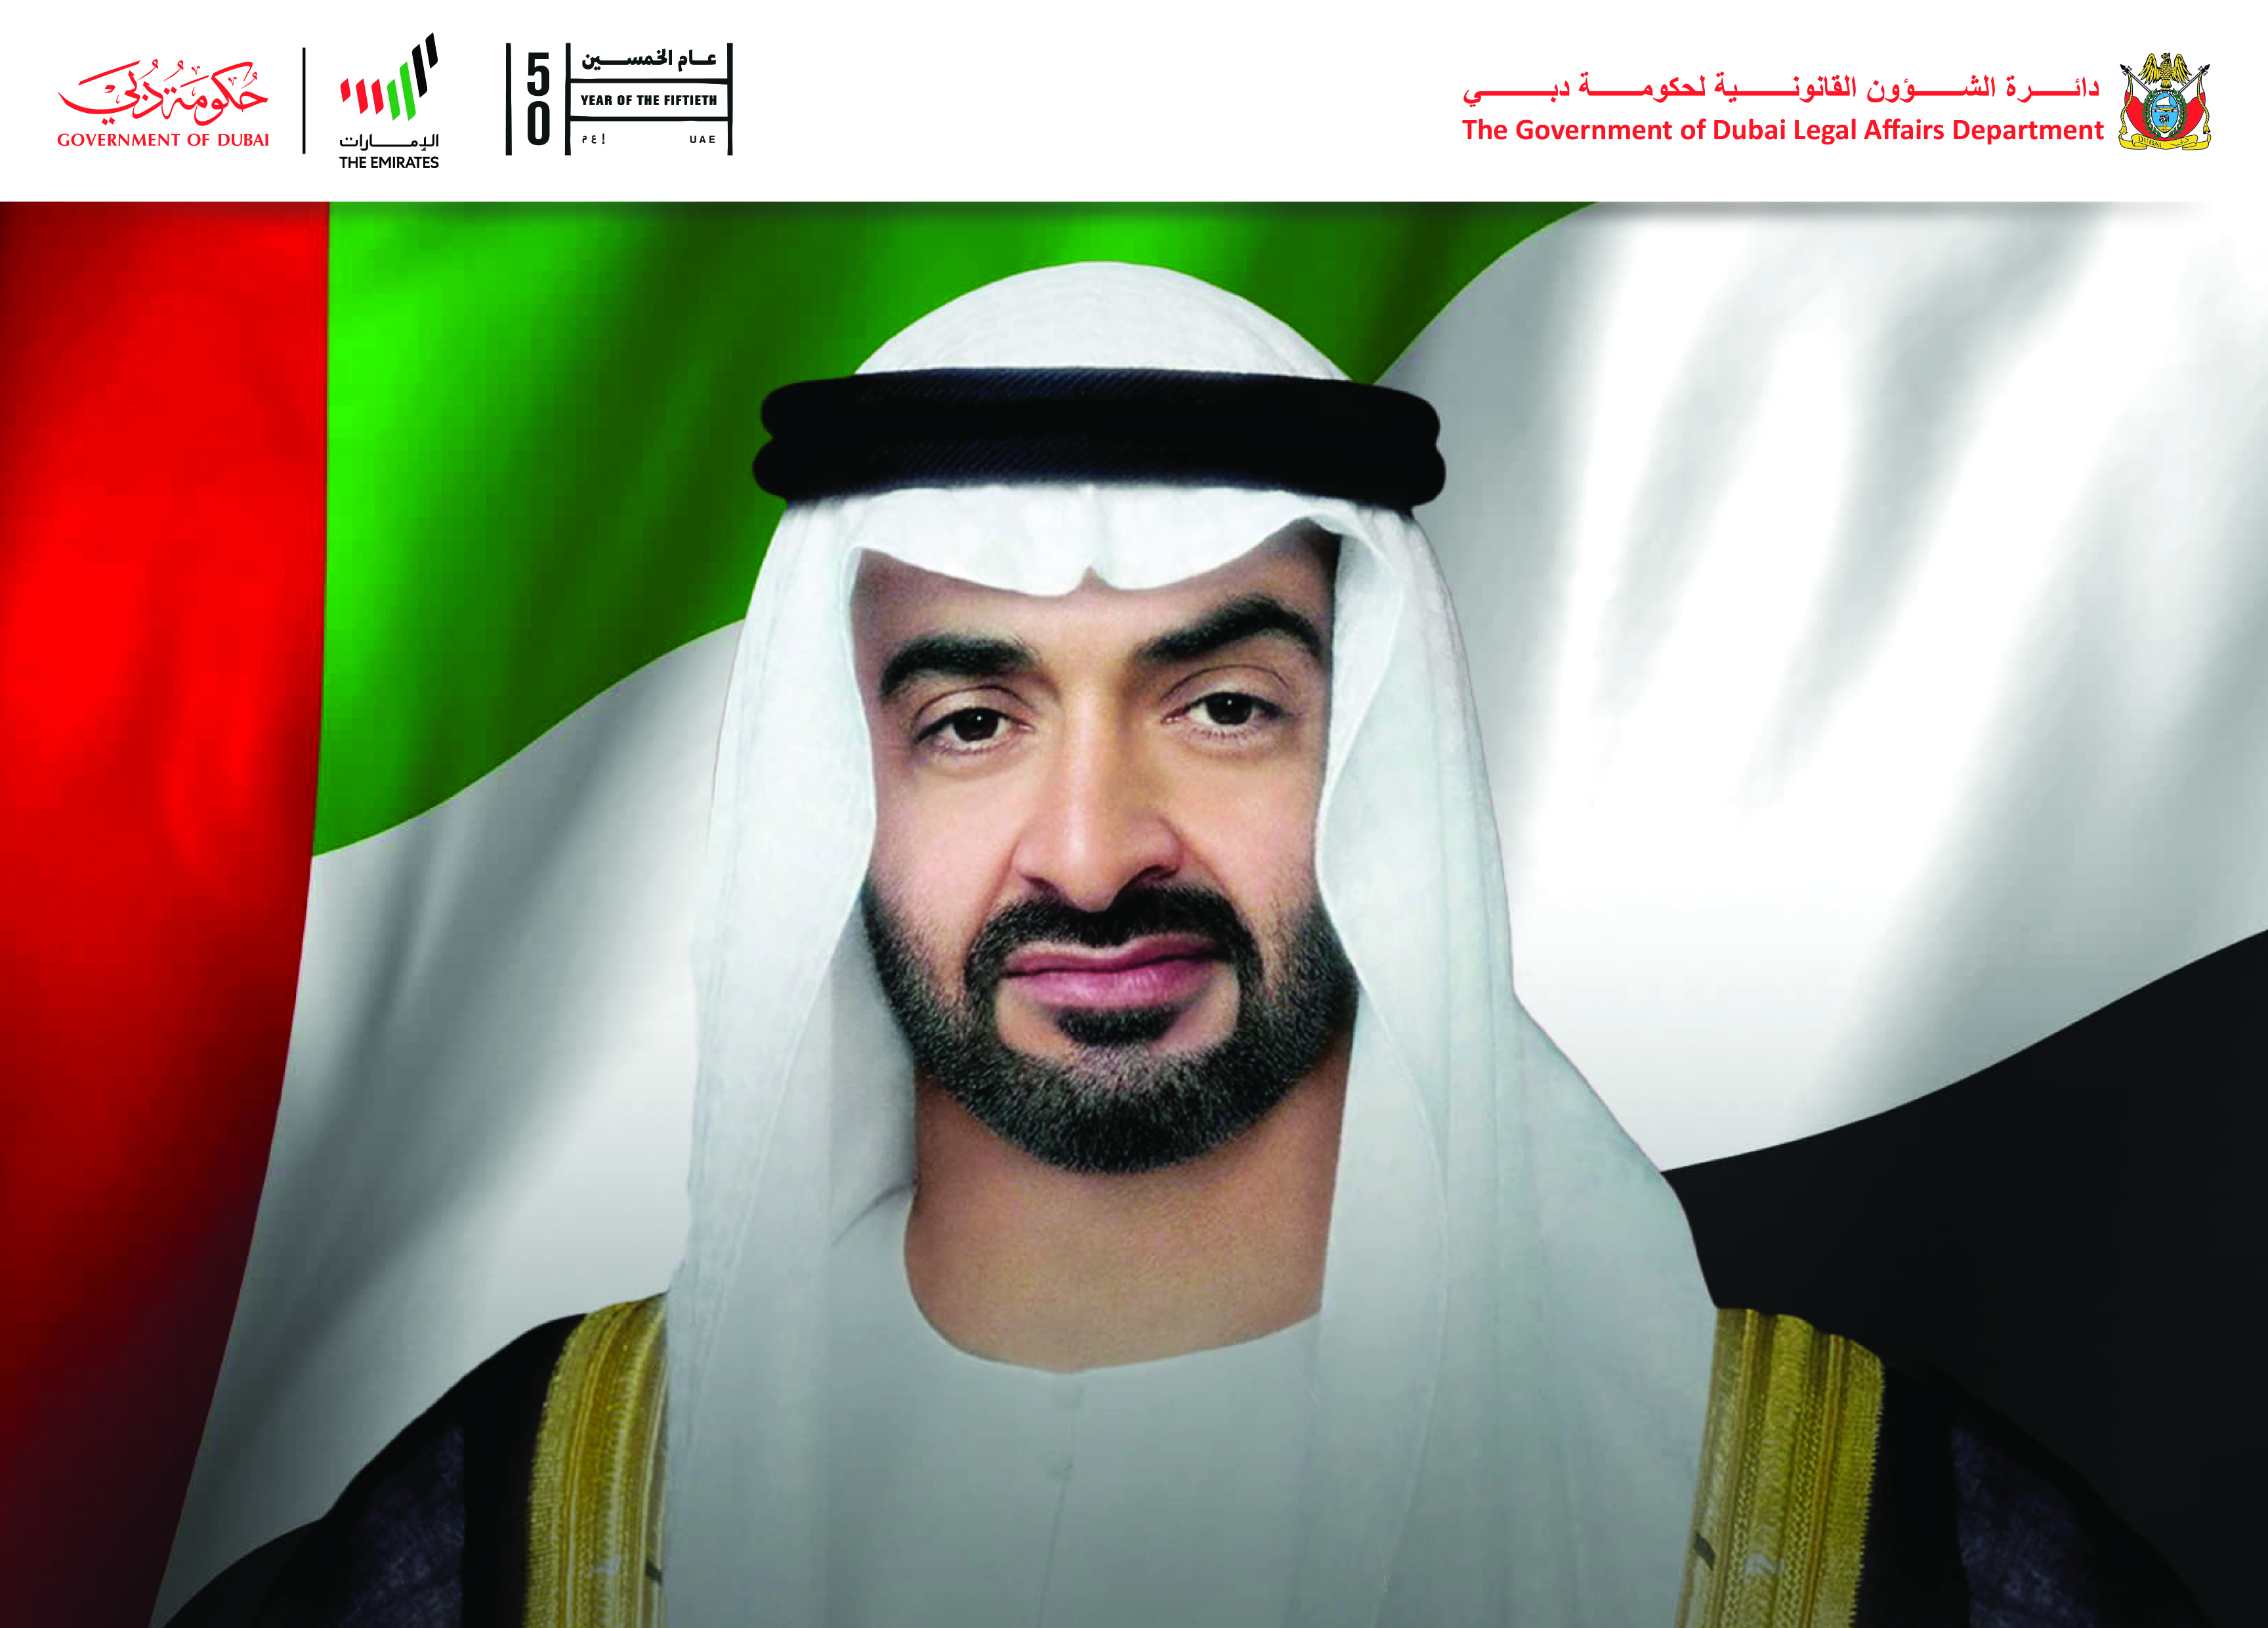  Statement of the Government of Dubai Legal Affairs Department on the Election of His Highness Sheikh Mohamed bin Zayed as the UAE President